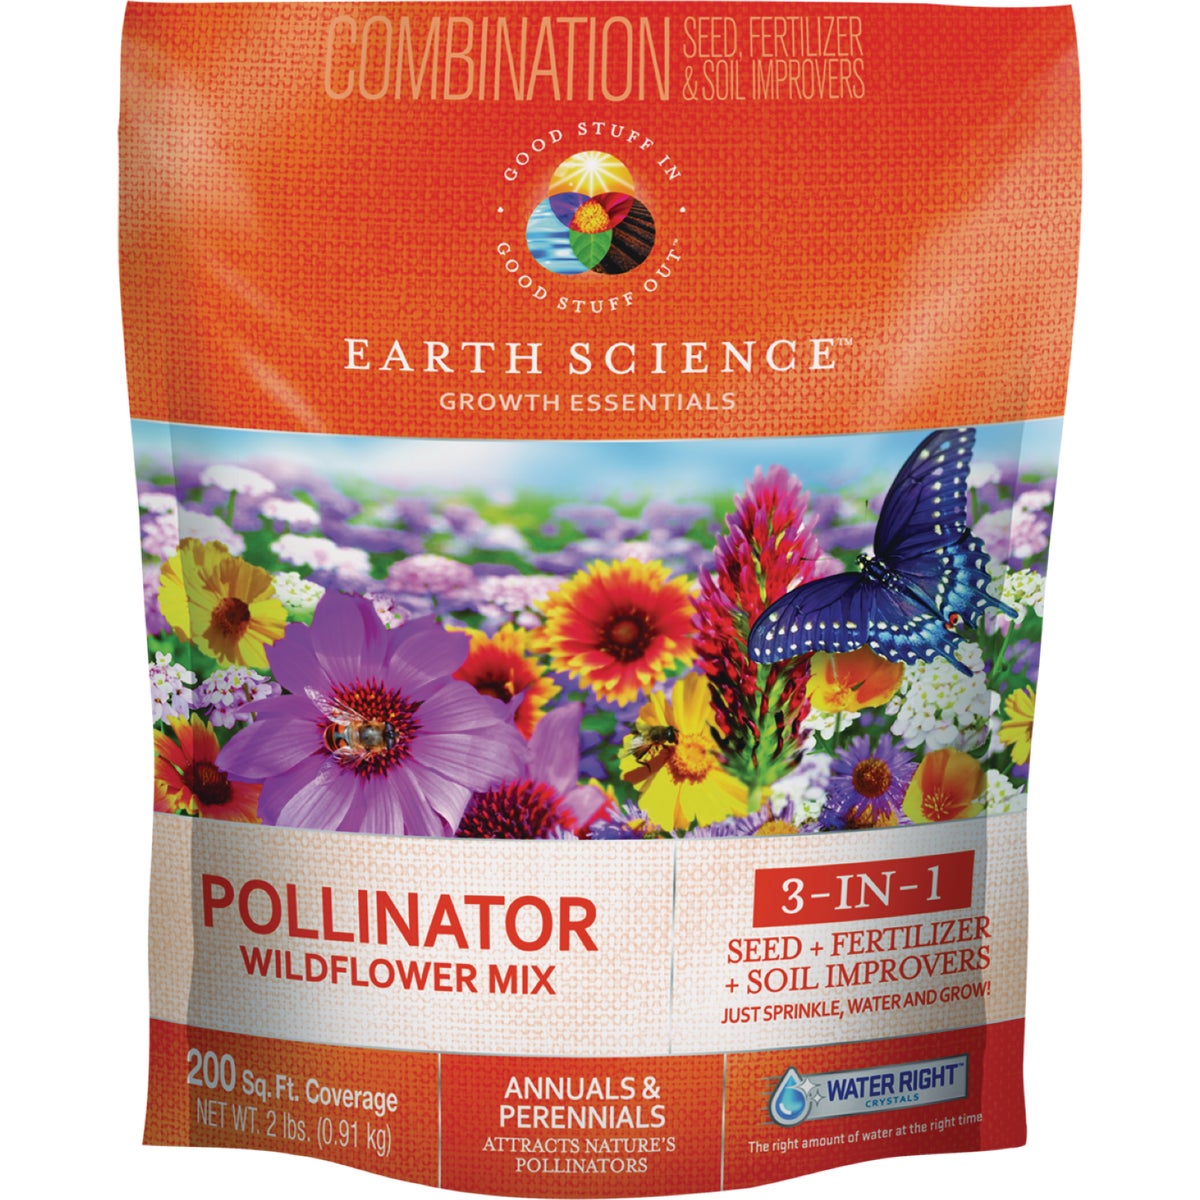 Earth Science All-In-One 2 Lb. 200 Sq. Ft. Coverage Pollinator Wildflower Seed Mix